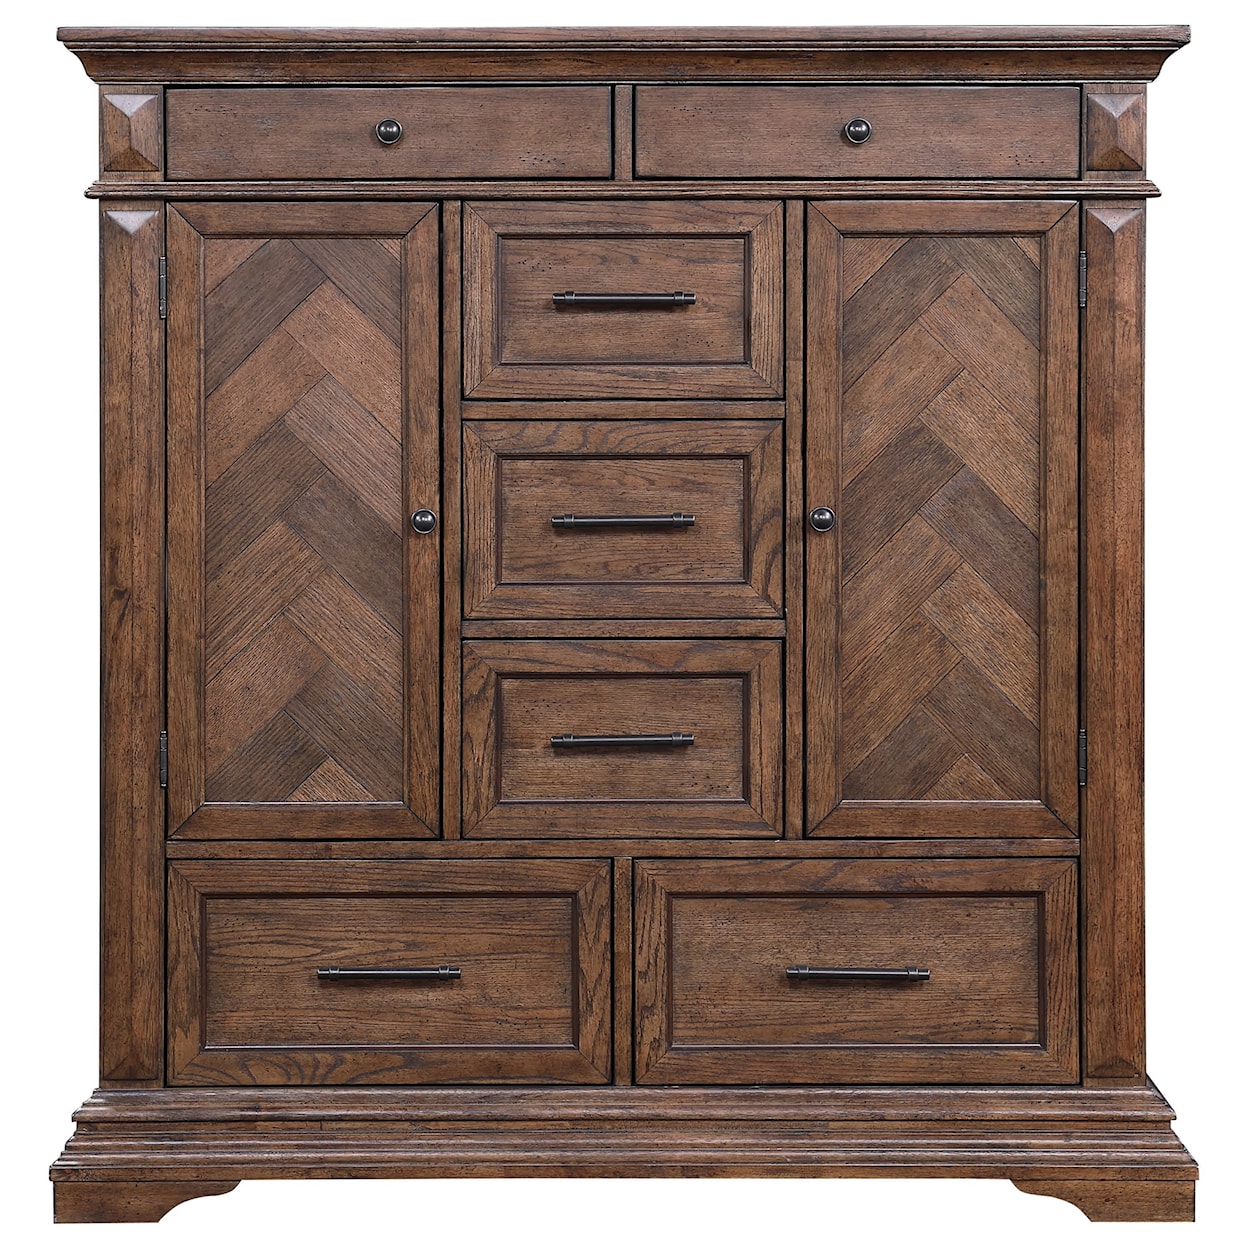 New Classic Mar Vista Chest with Doors